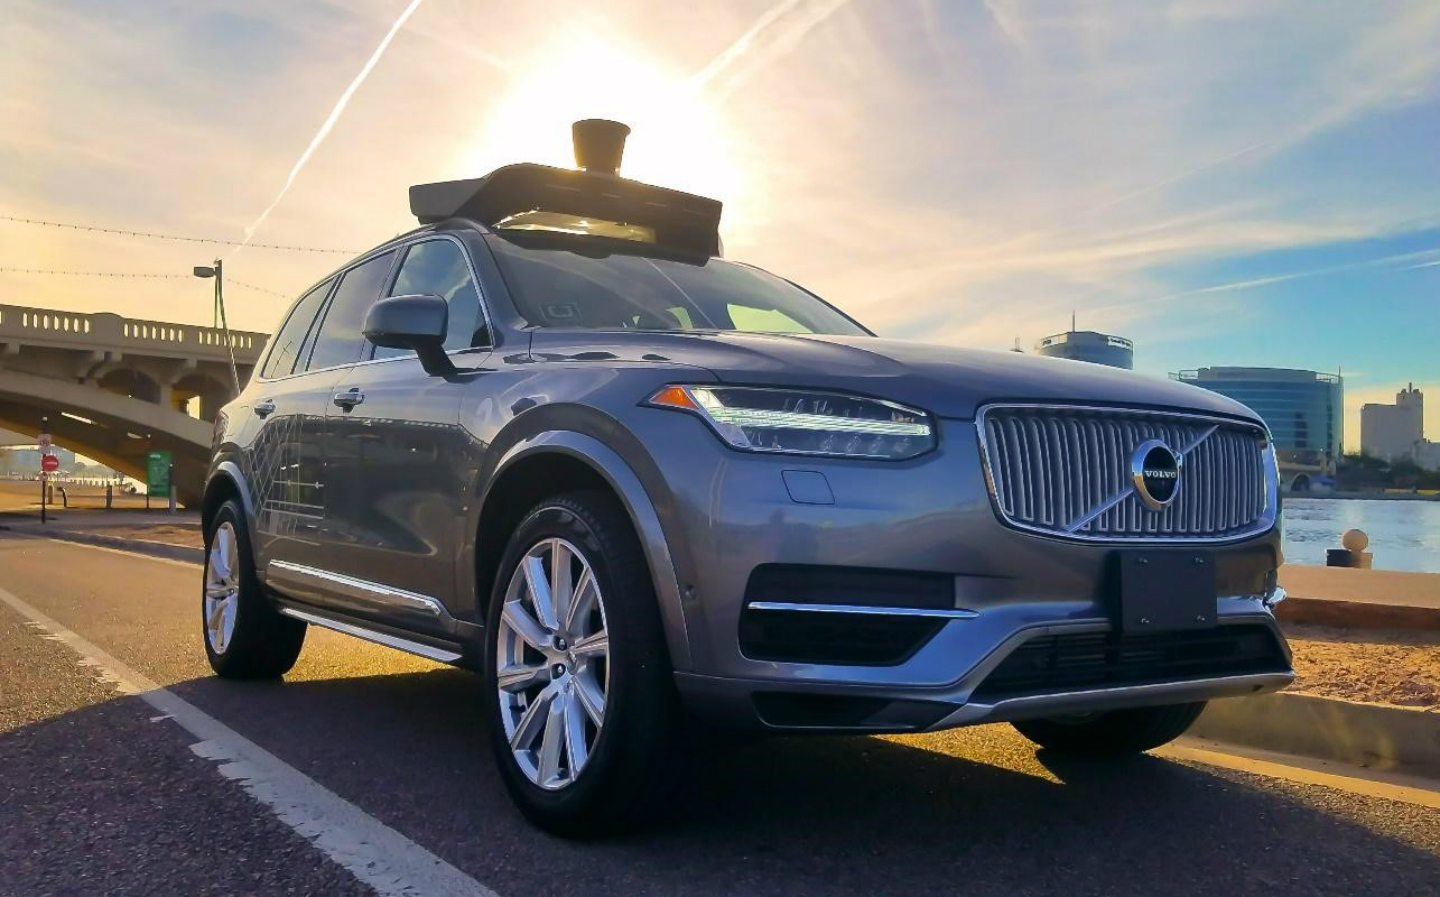 Are We Ready for Self-Driving Cars?